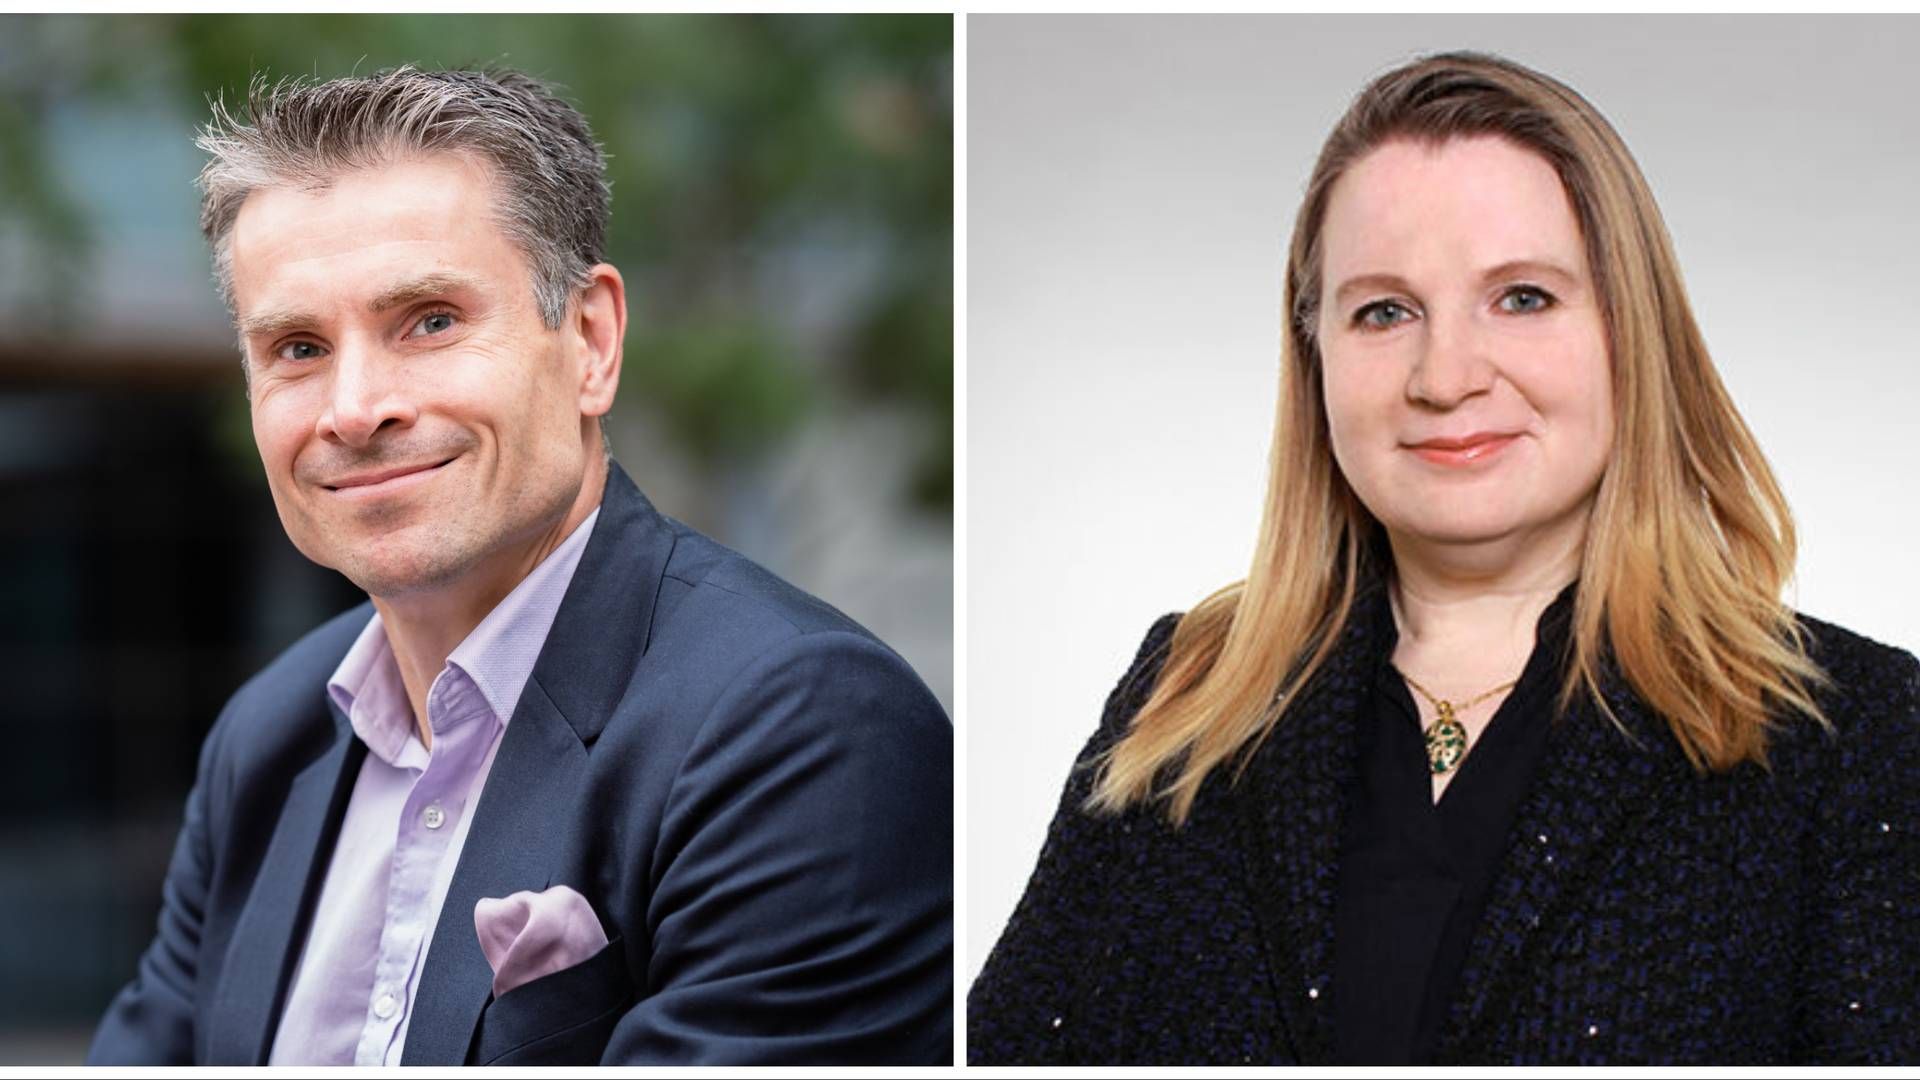 Jan von Gerich, chief strategist, global research at Nordea Markets and Anna Hyrske, principal responsible investment specialist at the Bank of Finland. | Photo: PR Nordea and Bank of Finland.